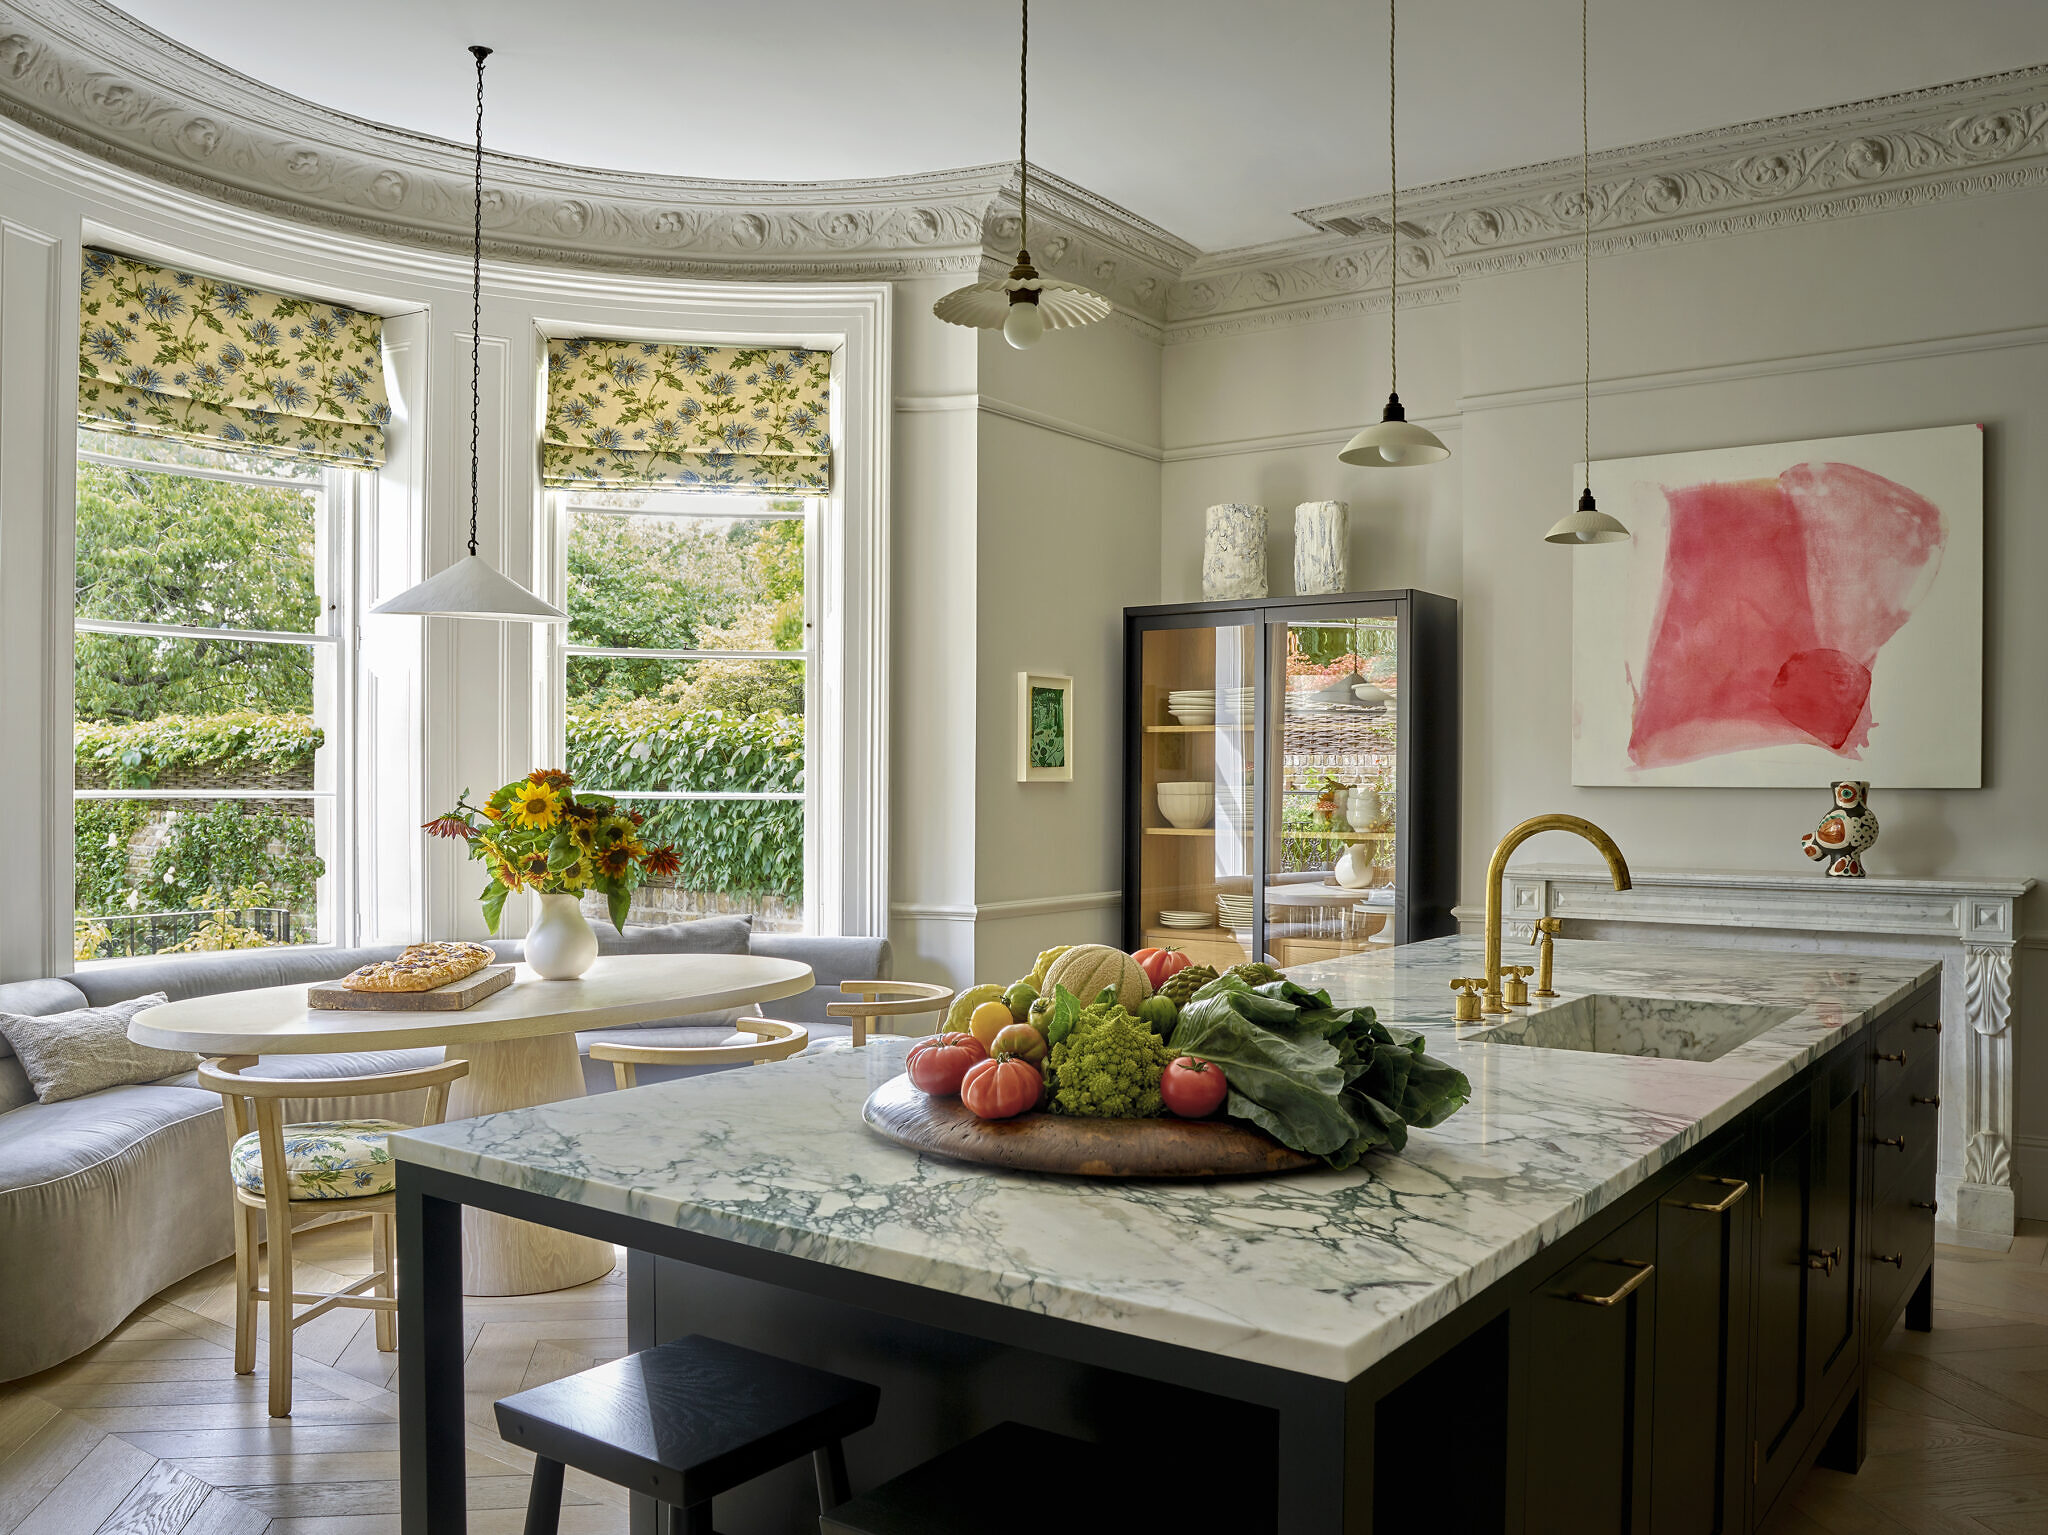 Kitchen image with marble countertops on the kitchen island and gold detailing. There is an oval table behind, with a curved sofa and chairs with flower print.